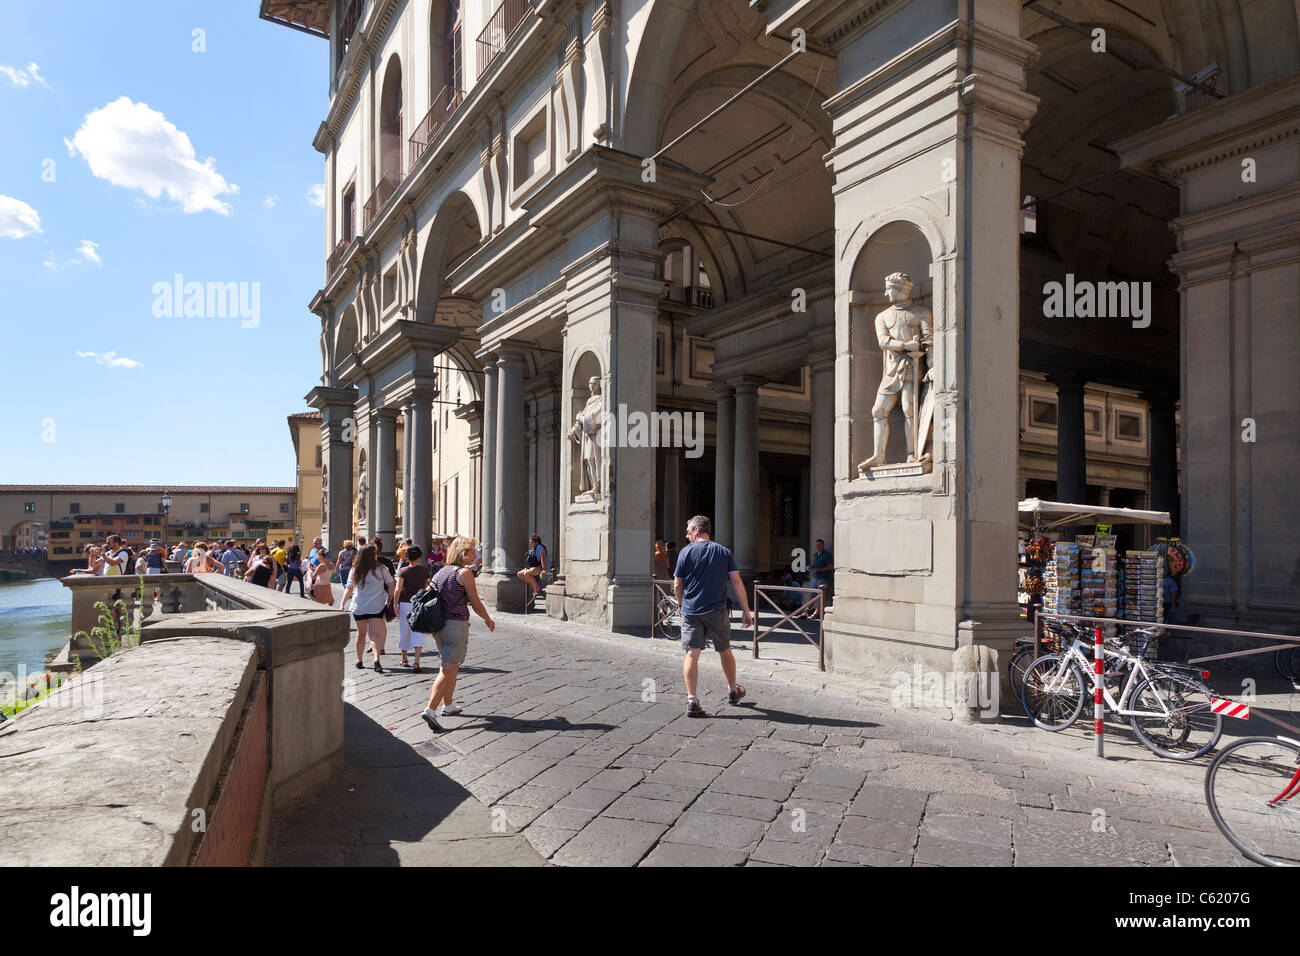 The Uffizi Gallery, front facade facing the Arno river, Florence, Italy Stock Photo